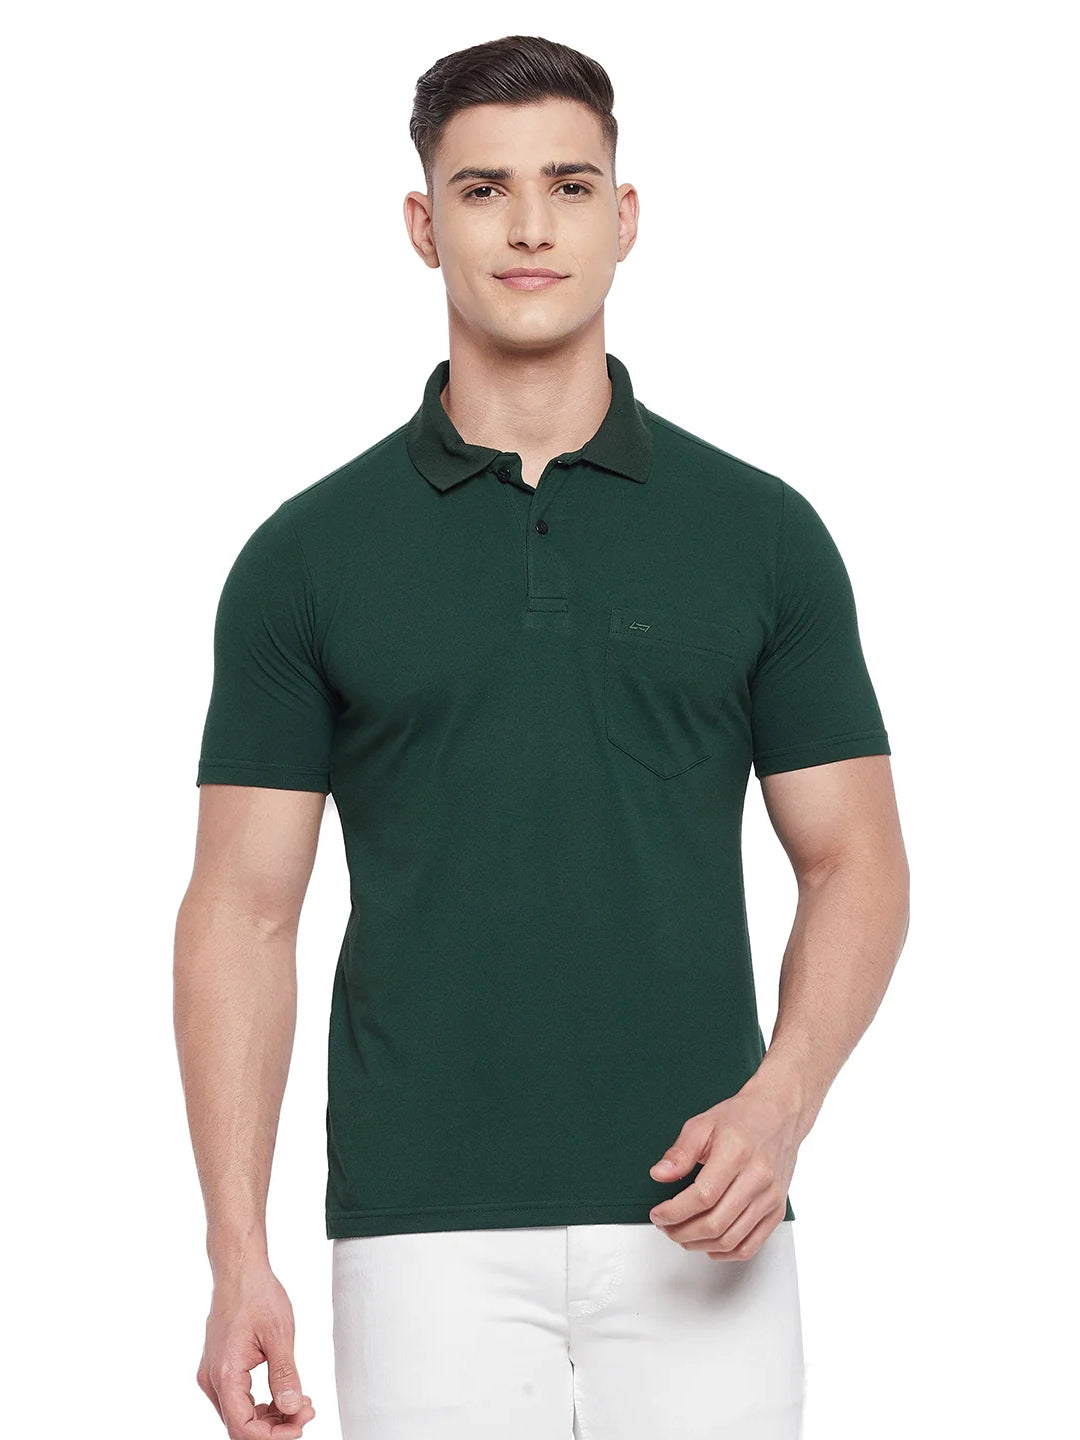 Neva Men Solid Color Polo Half Sleeve T-Shirt with Chest Pocket- Bottle Green